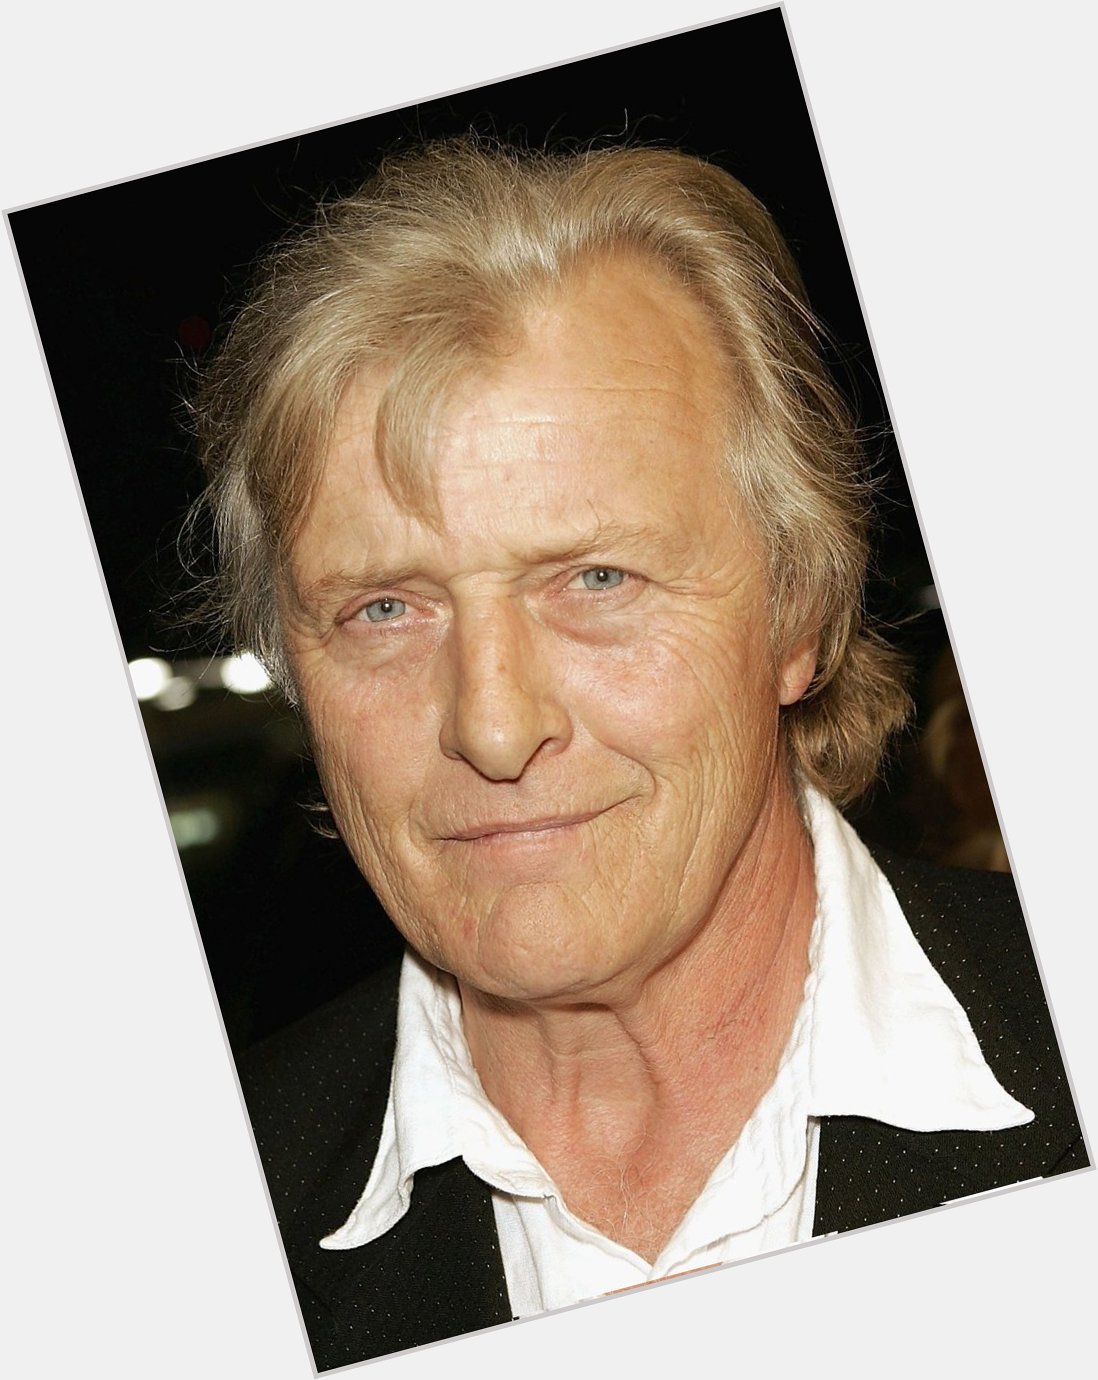 Happy Birthday to the late Rutger Hauer who would\ve turned 78 today. 